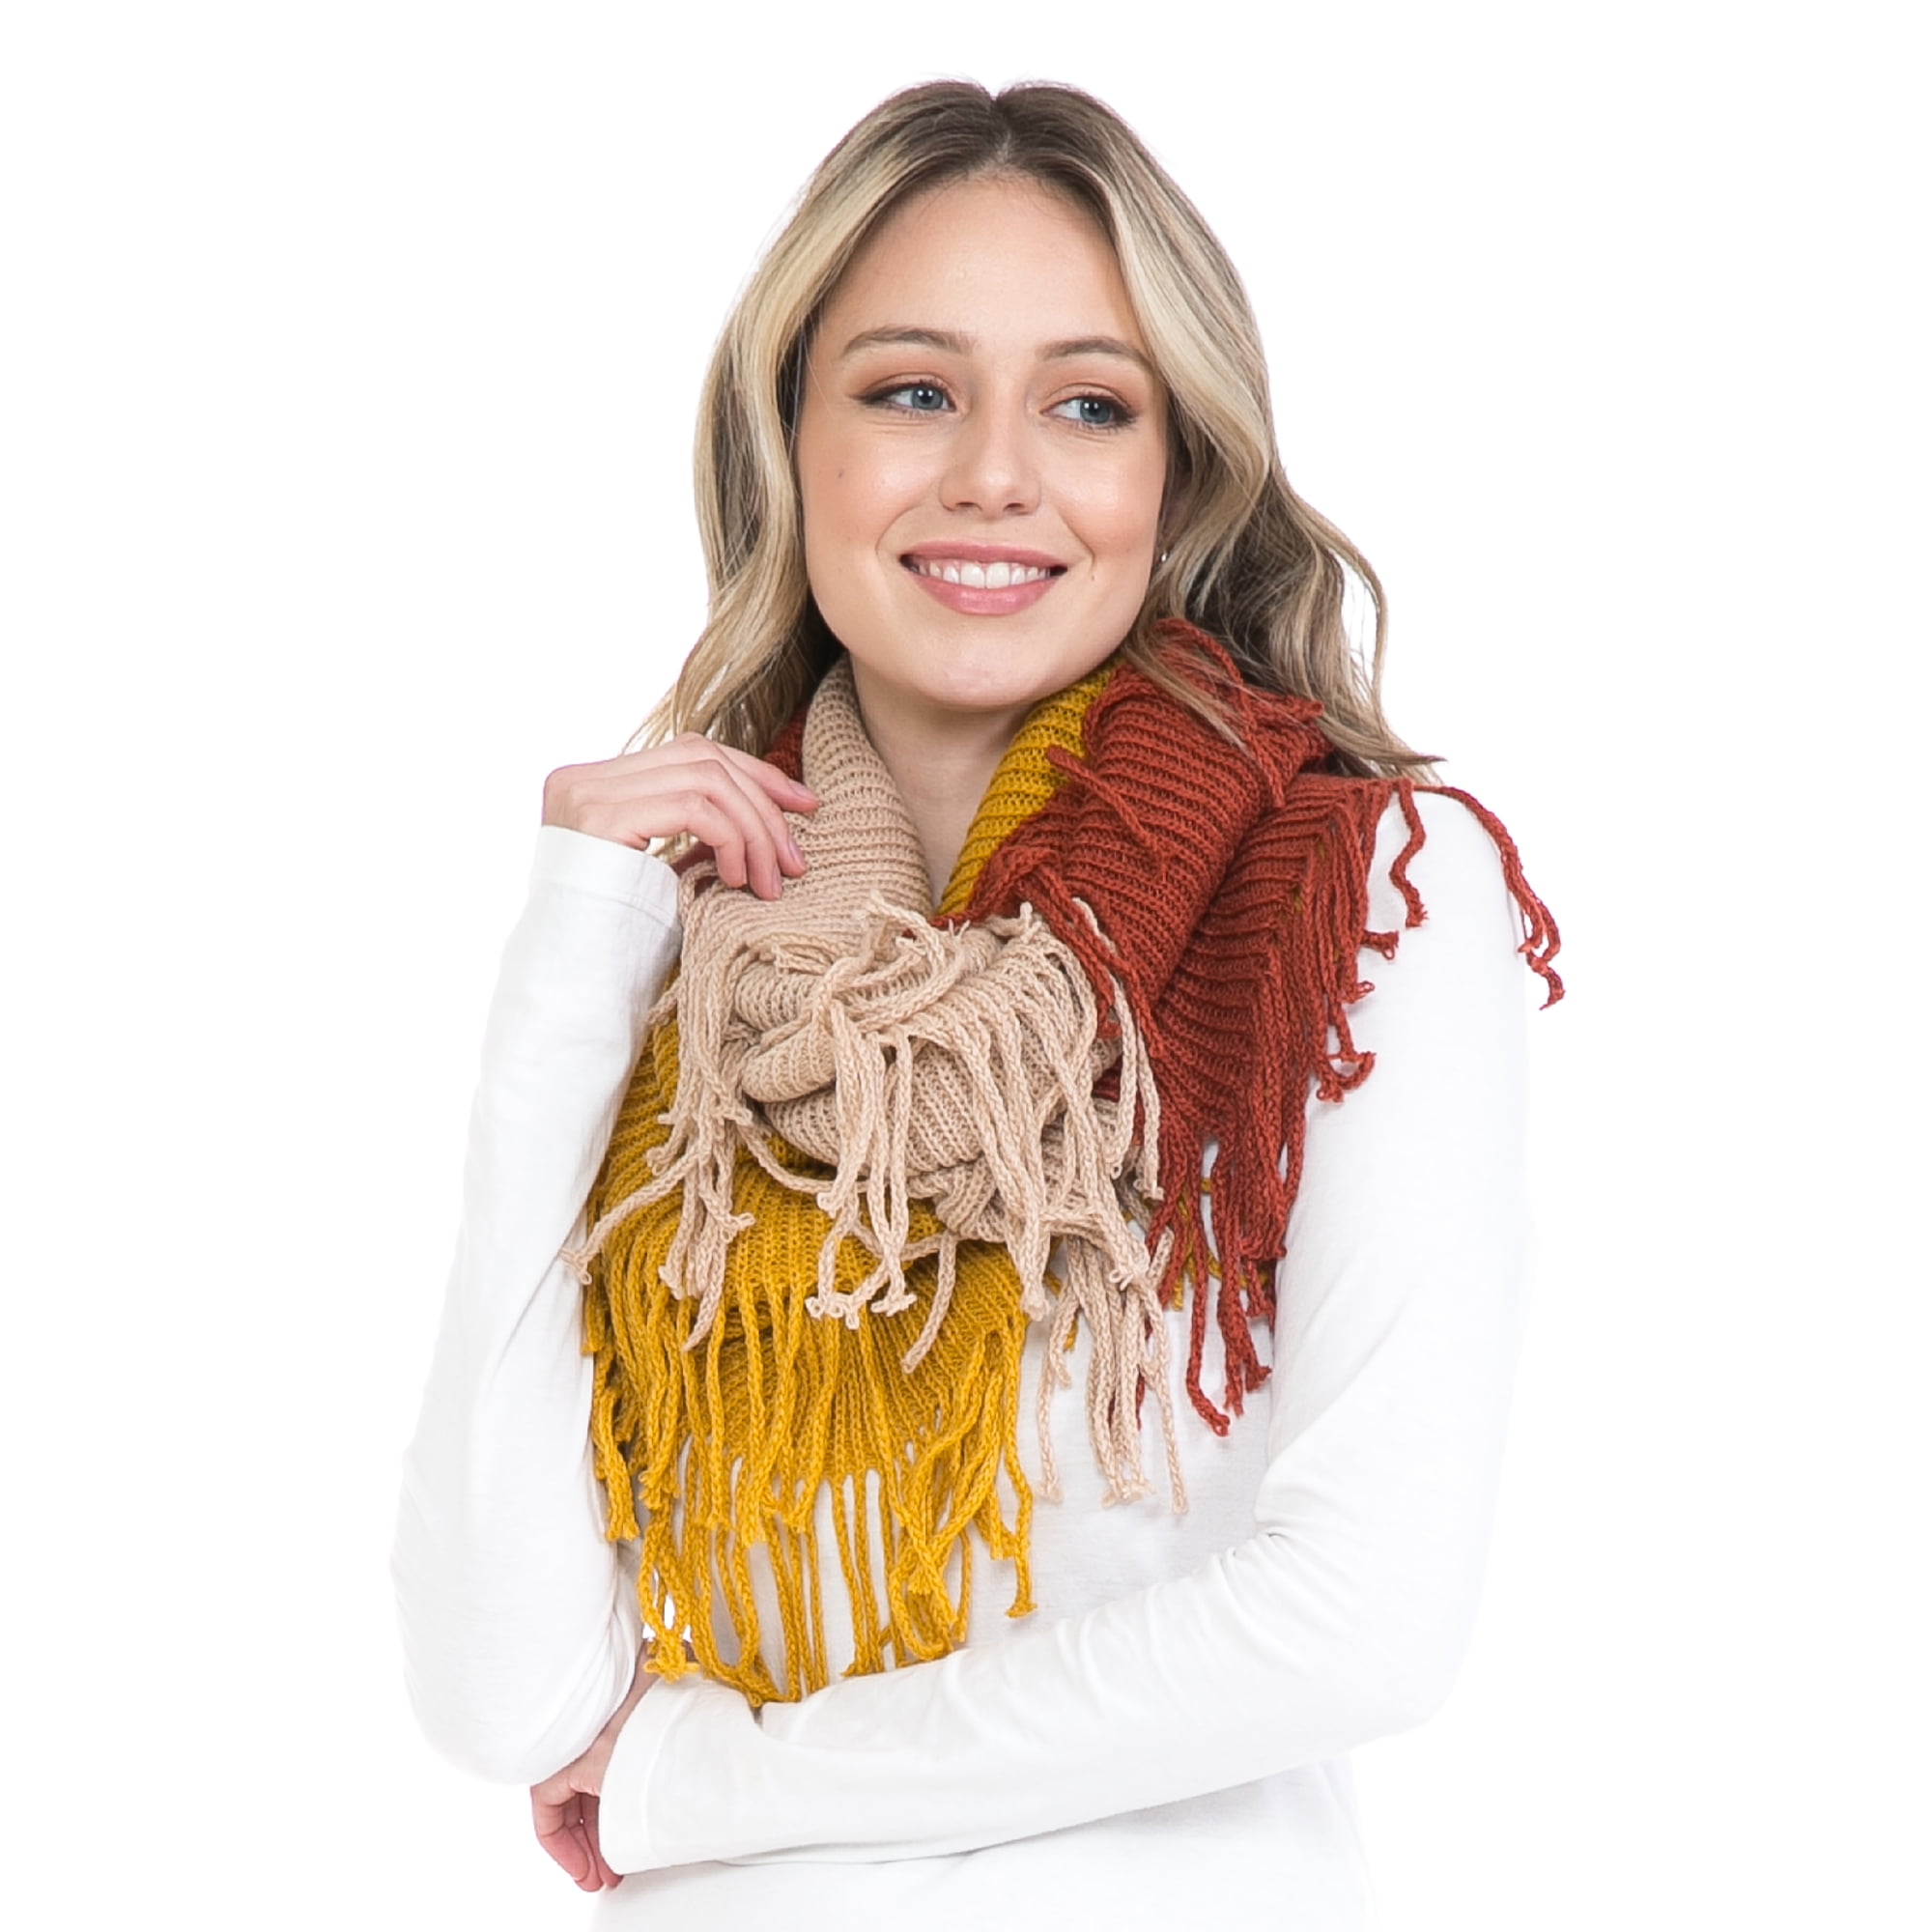 Basico Warm Knit Winter Scarfs For Women Multi Color 2 Infinity Scarf Circle Loop Scarves 